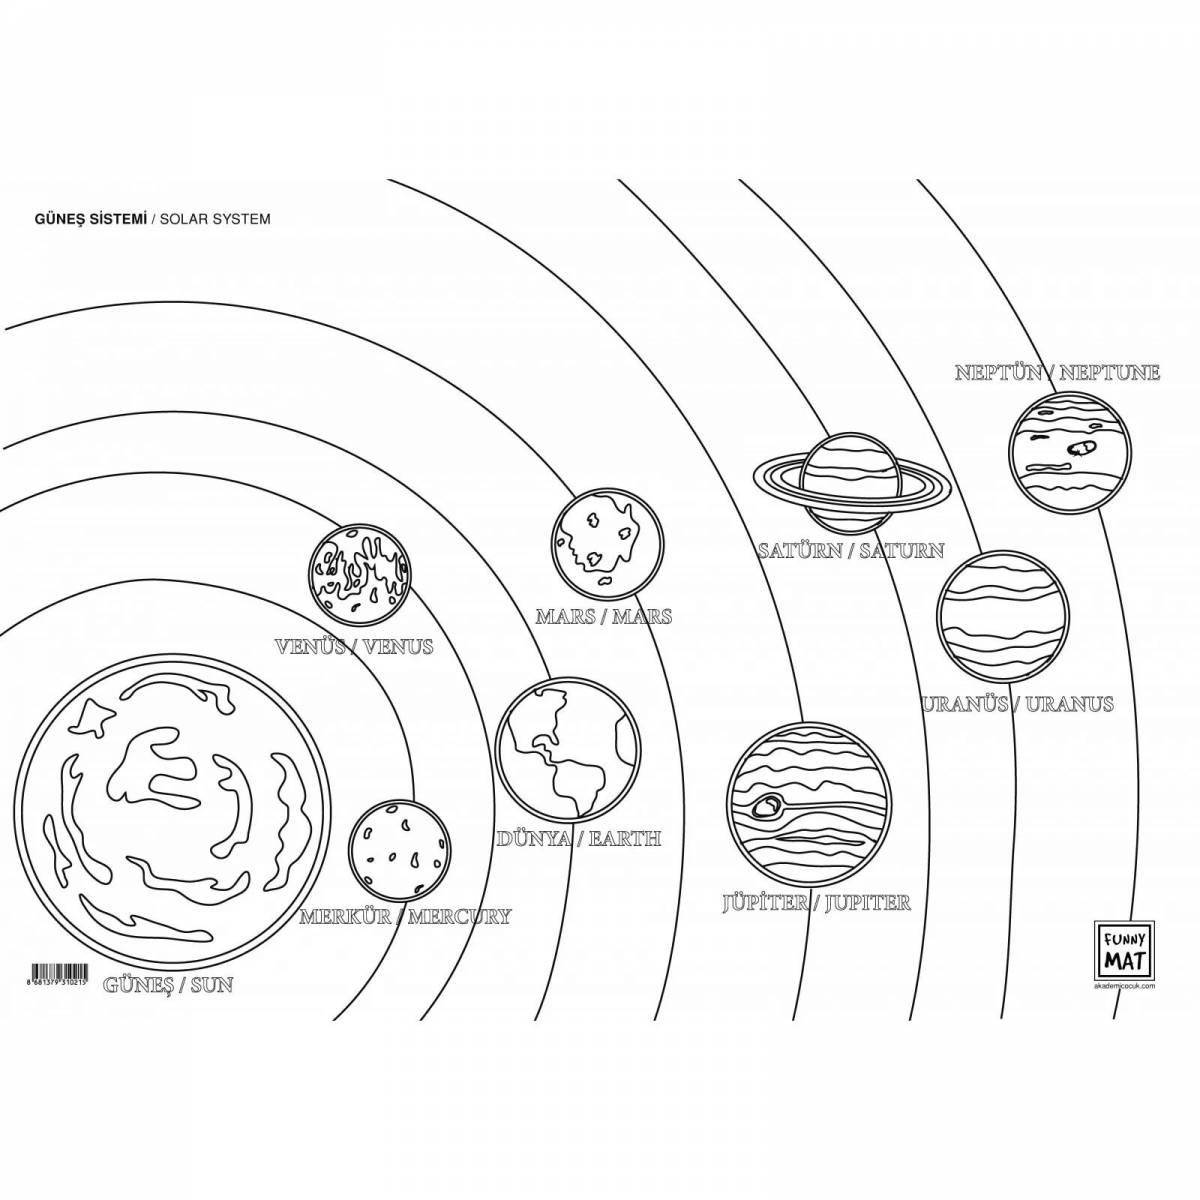 Glossy coloring of planets in the solar system in order from the sun